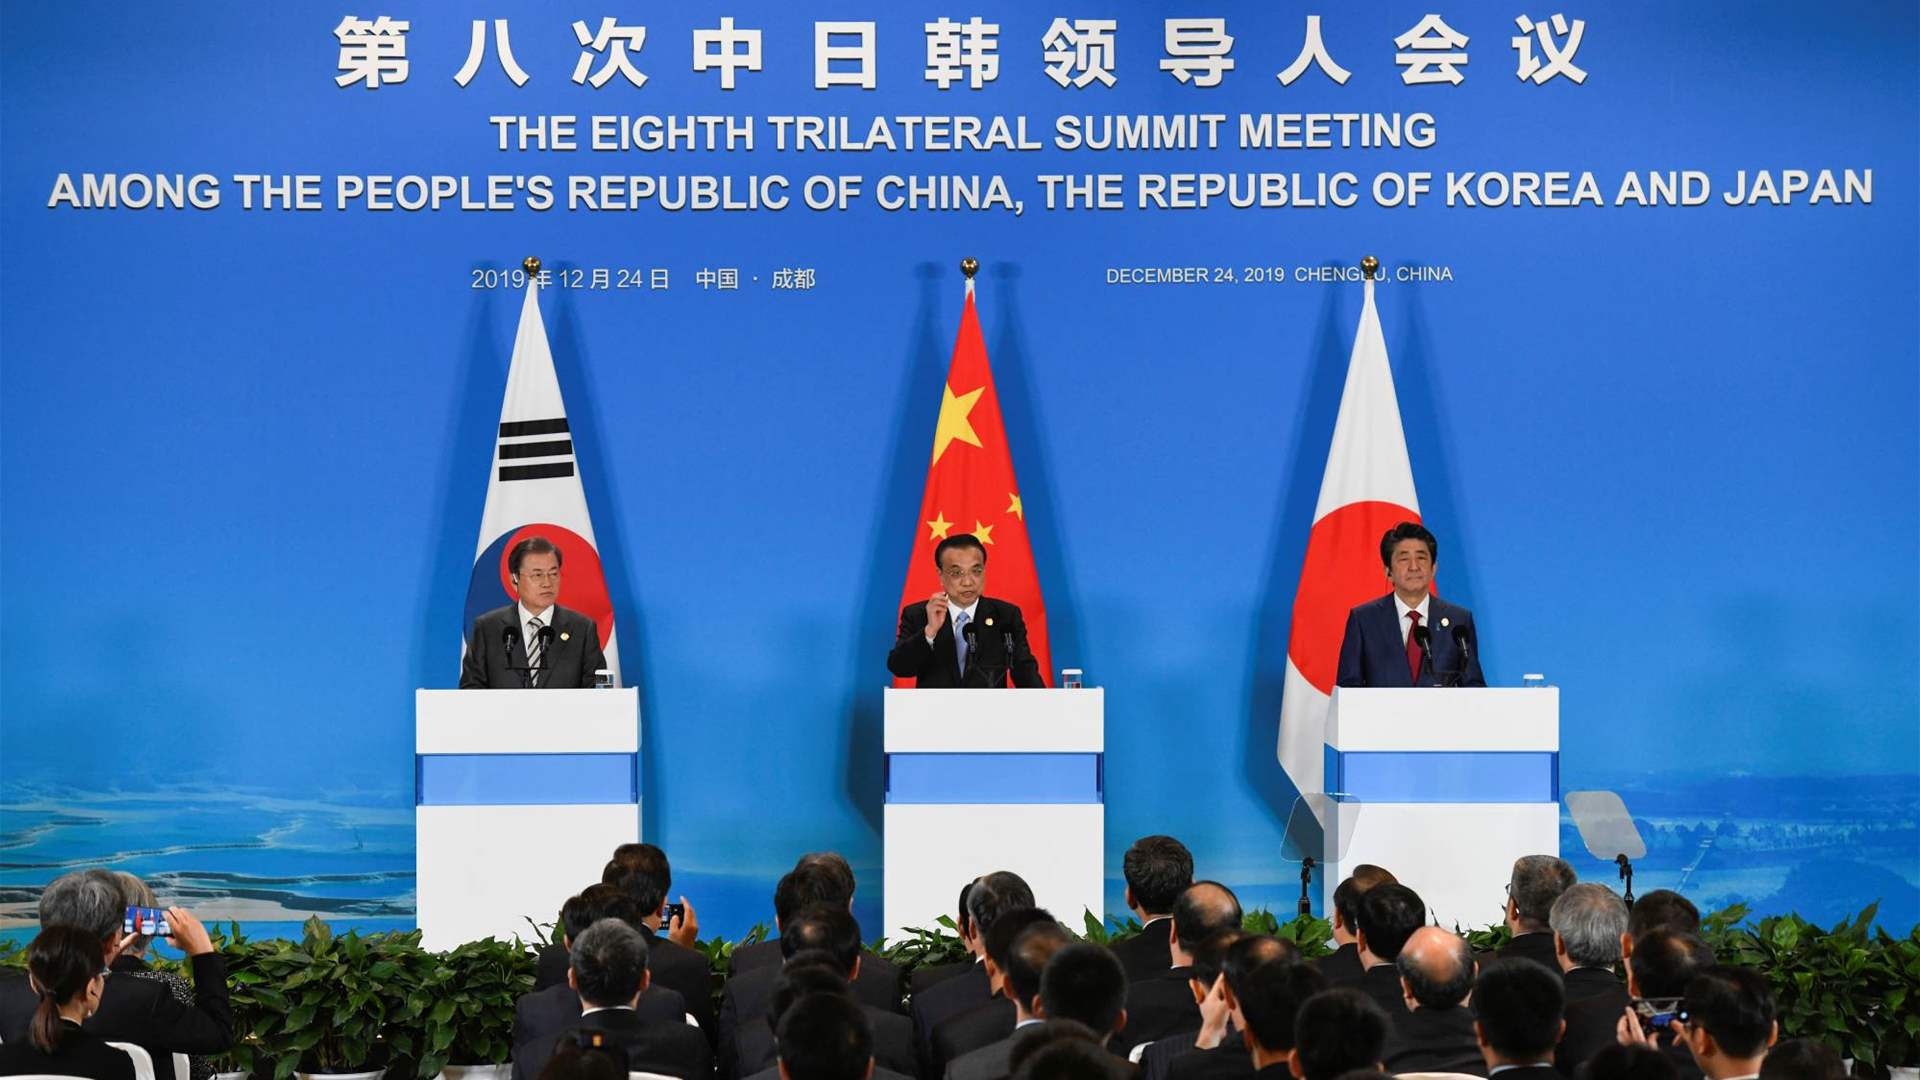 Chinese Premier lands in Seoul for trilateral summit with South Korea, Japan